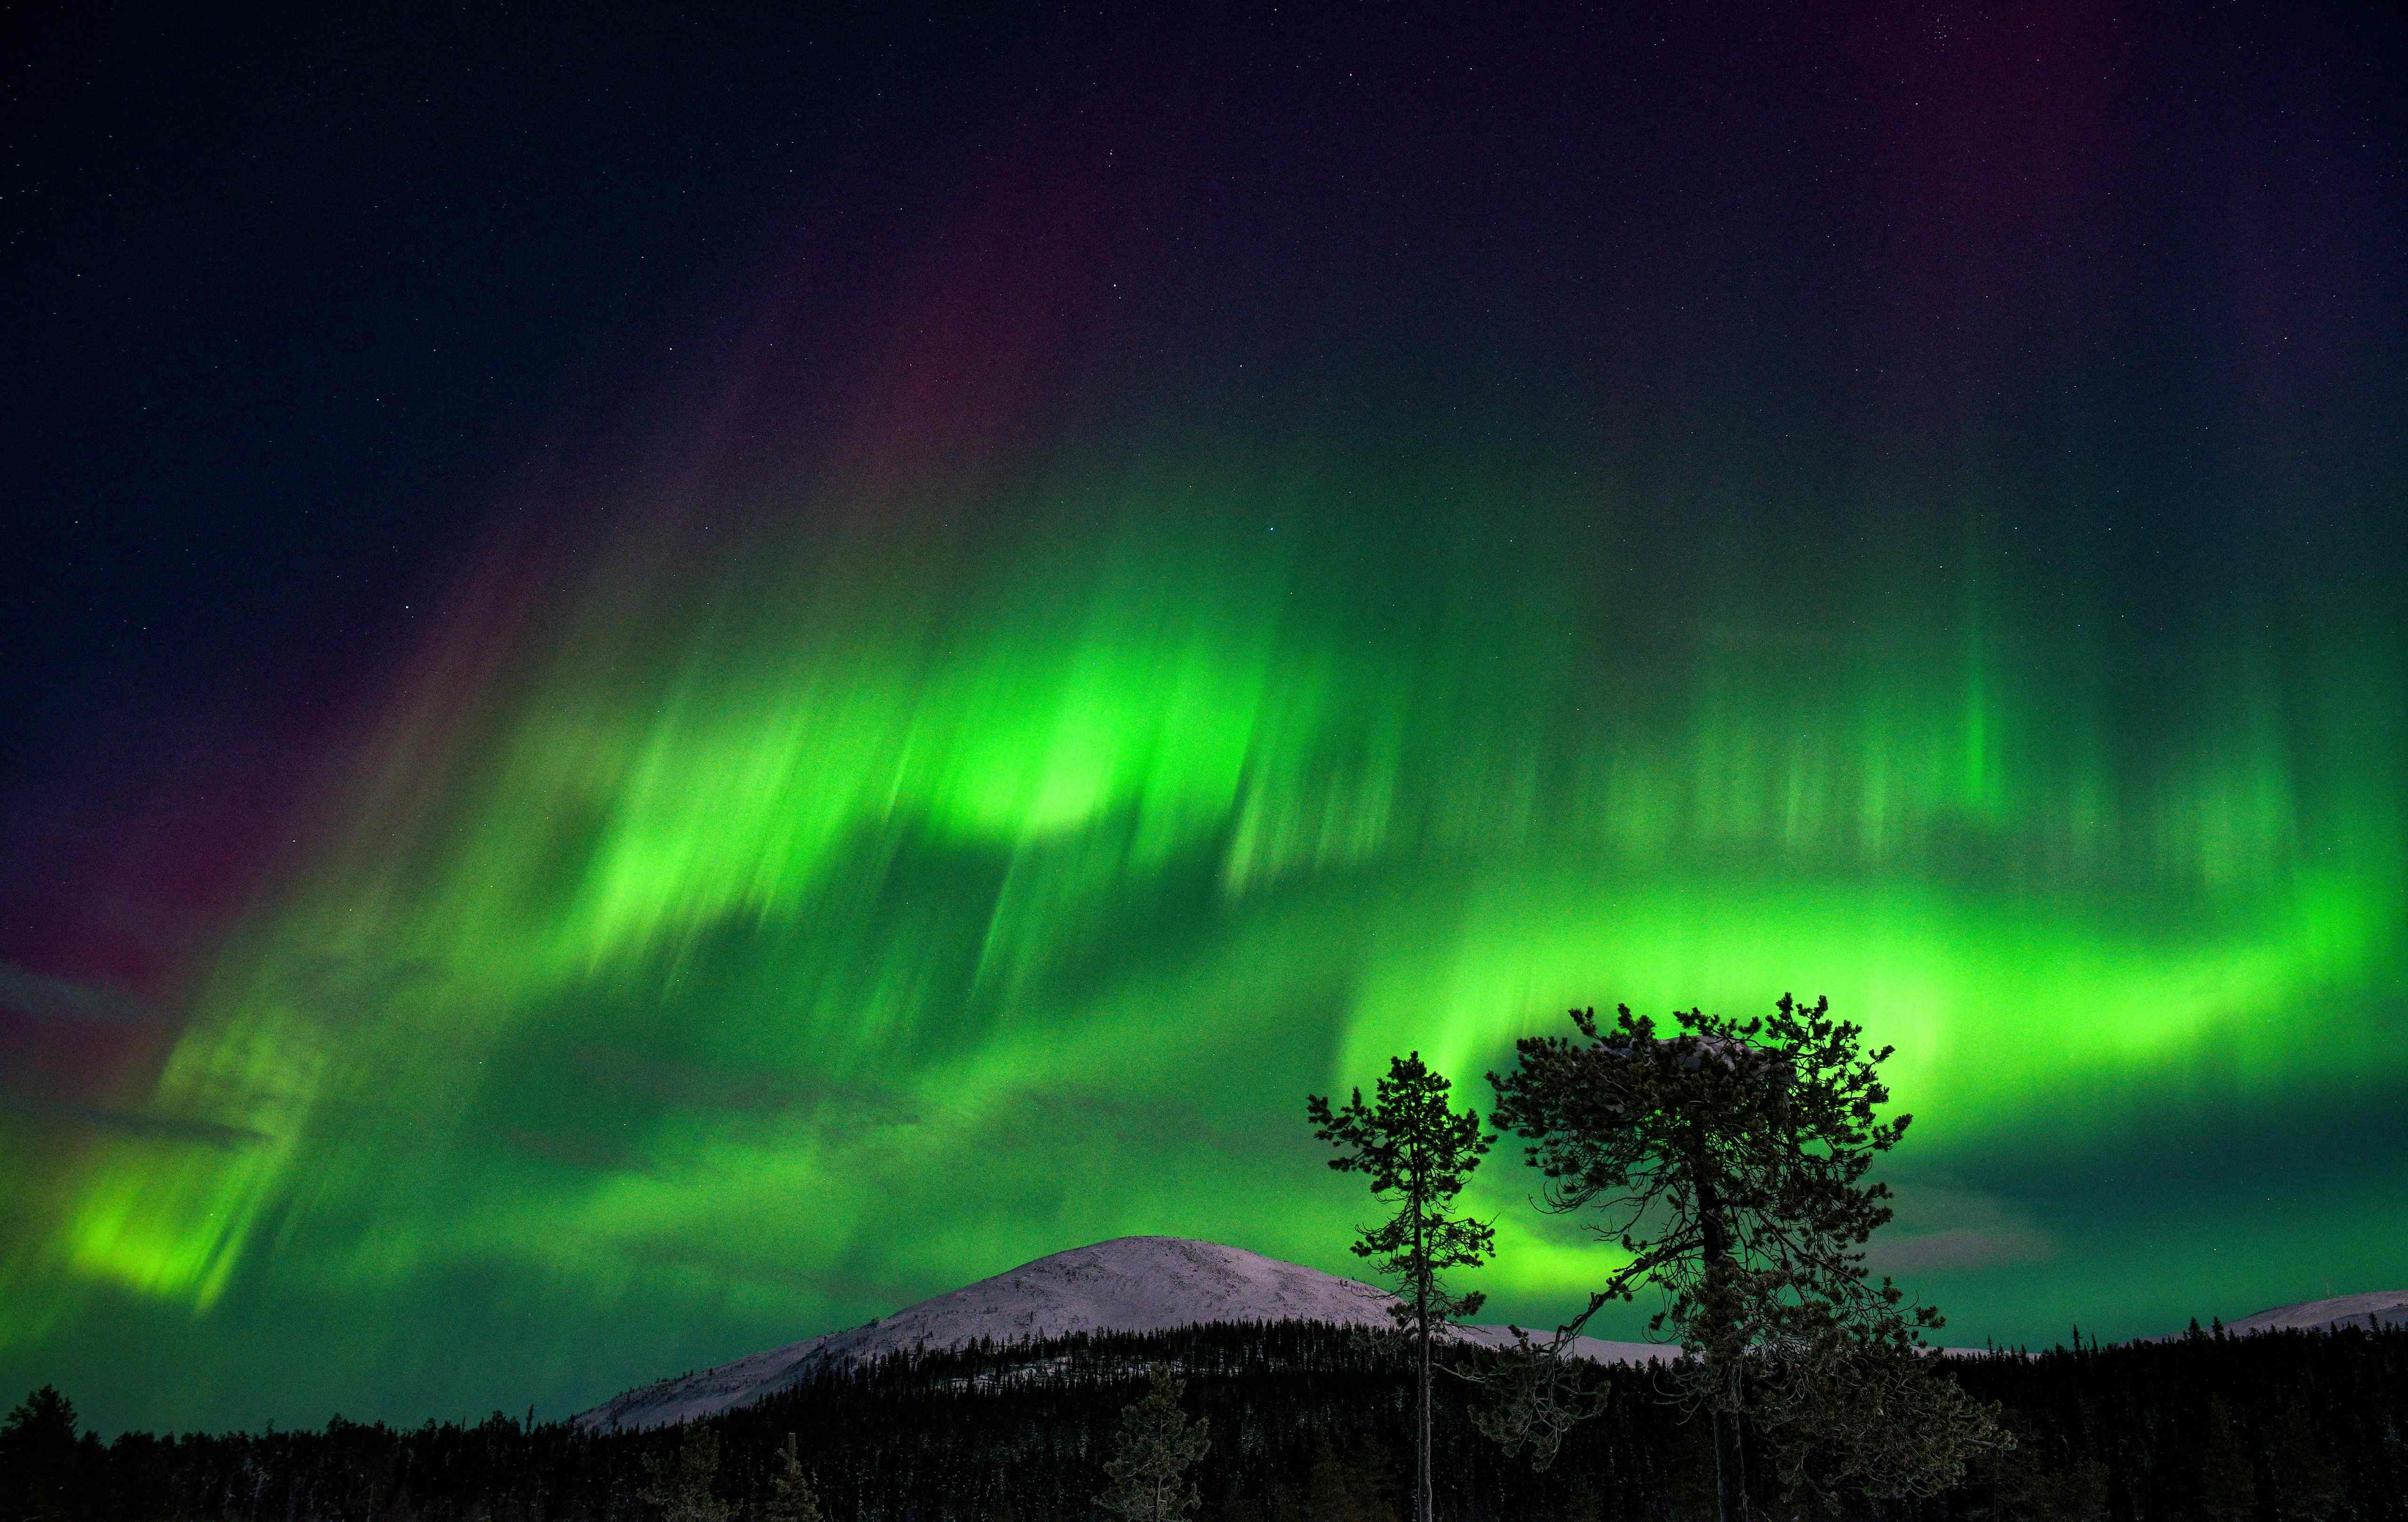 See the lights on snowmobiles or reindeer-drawn sleighs in Finnish Lapland